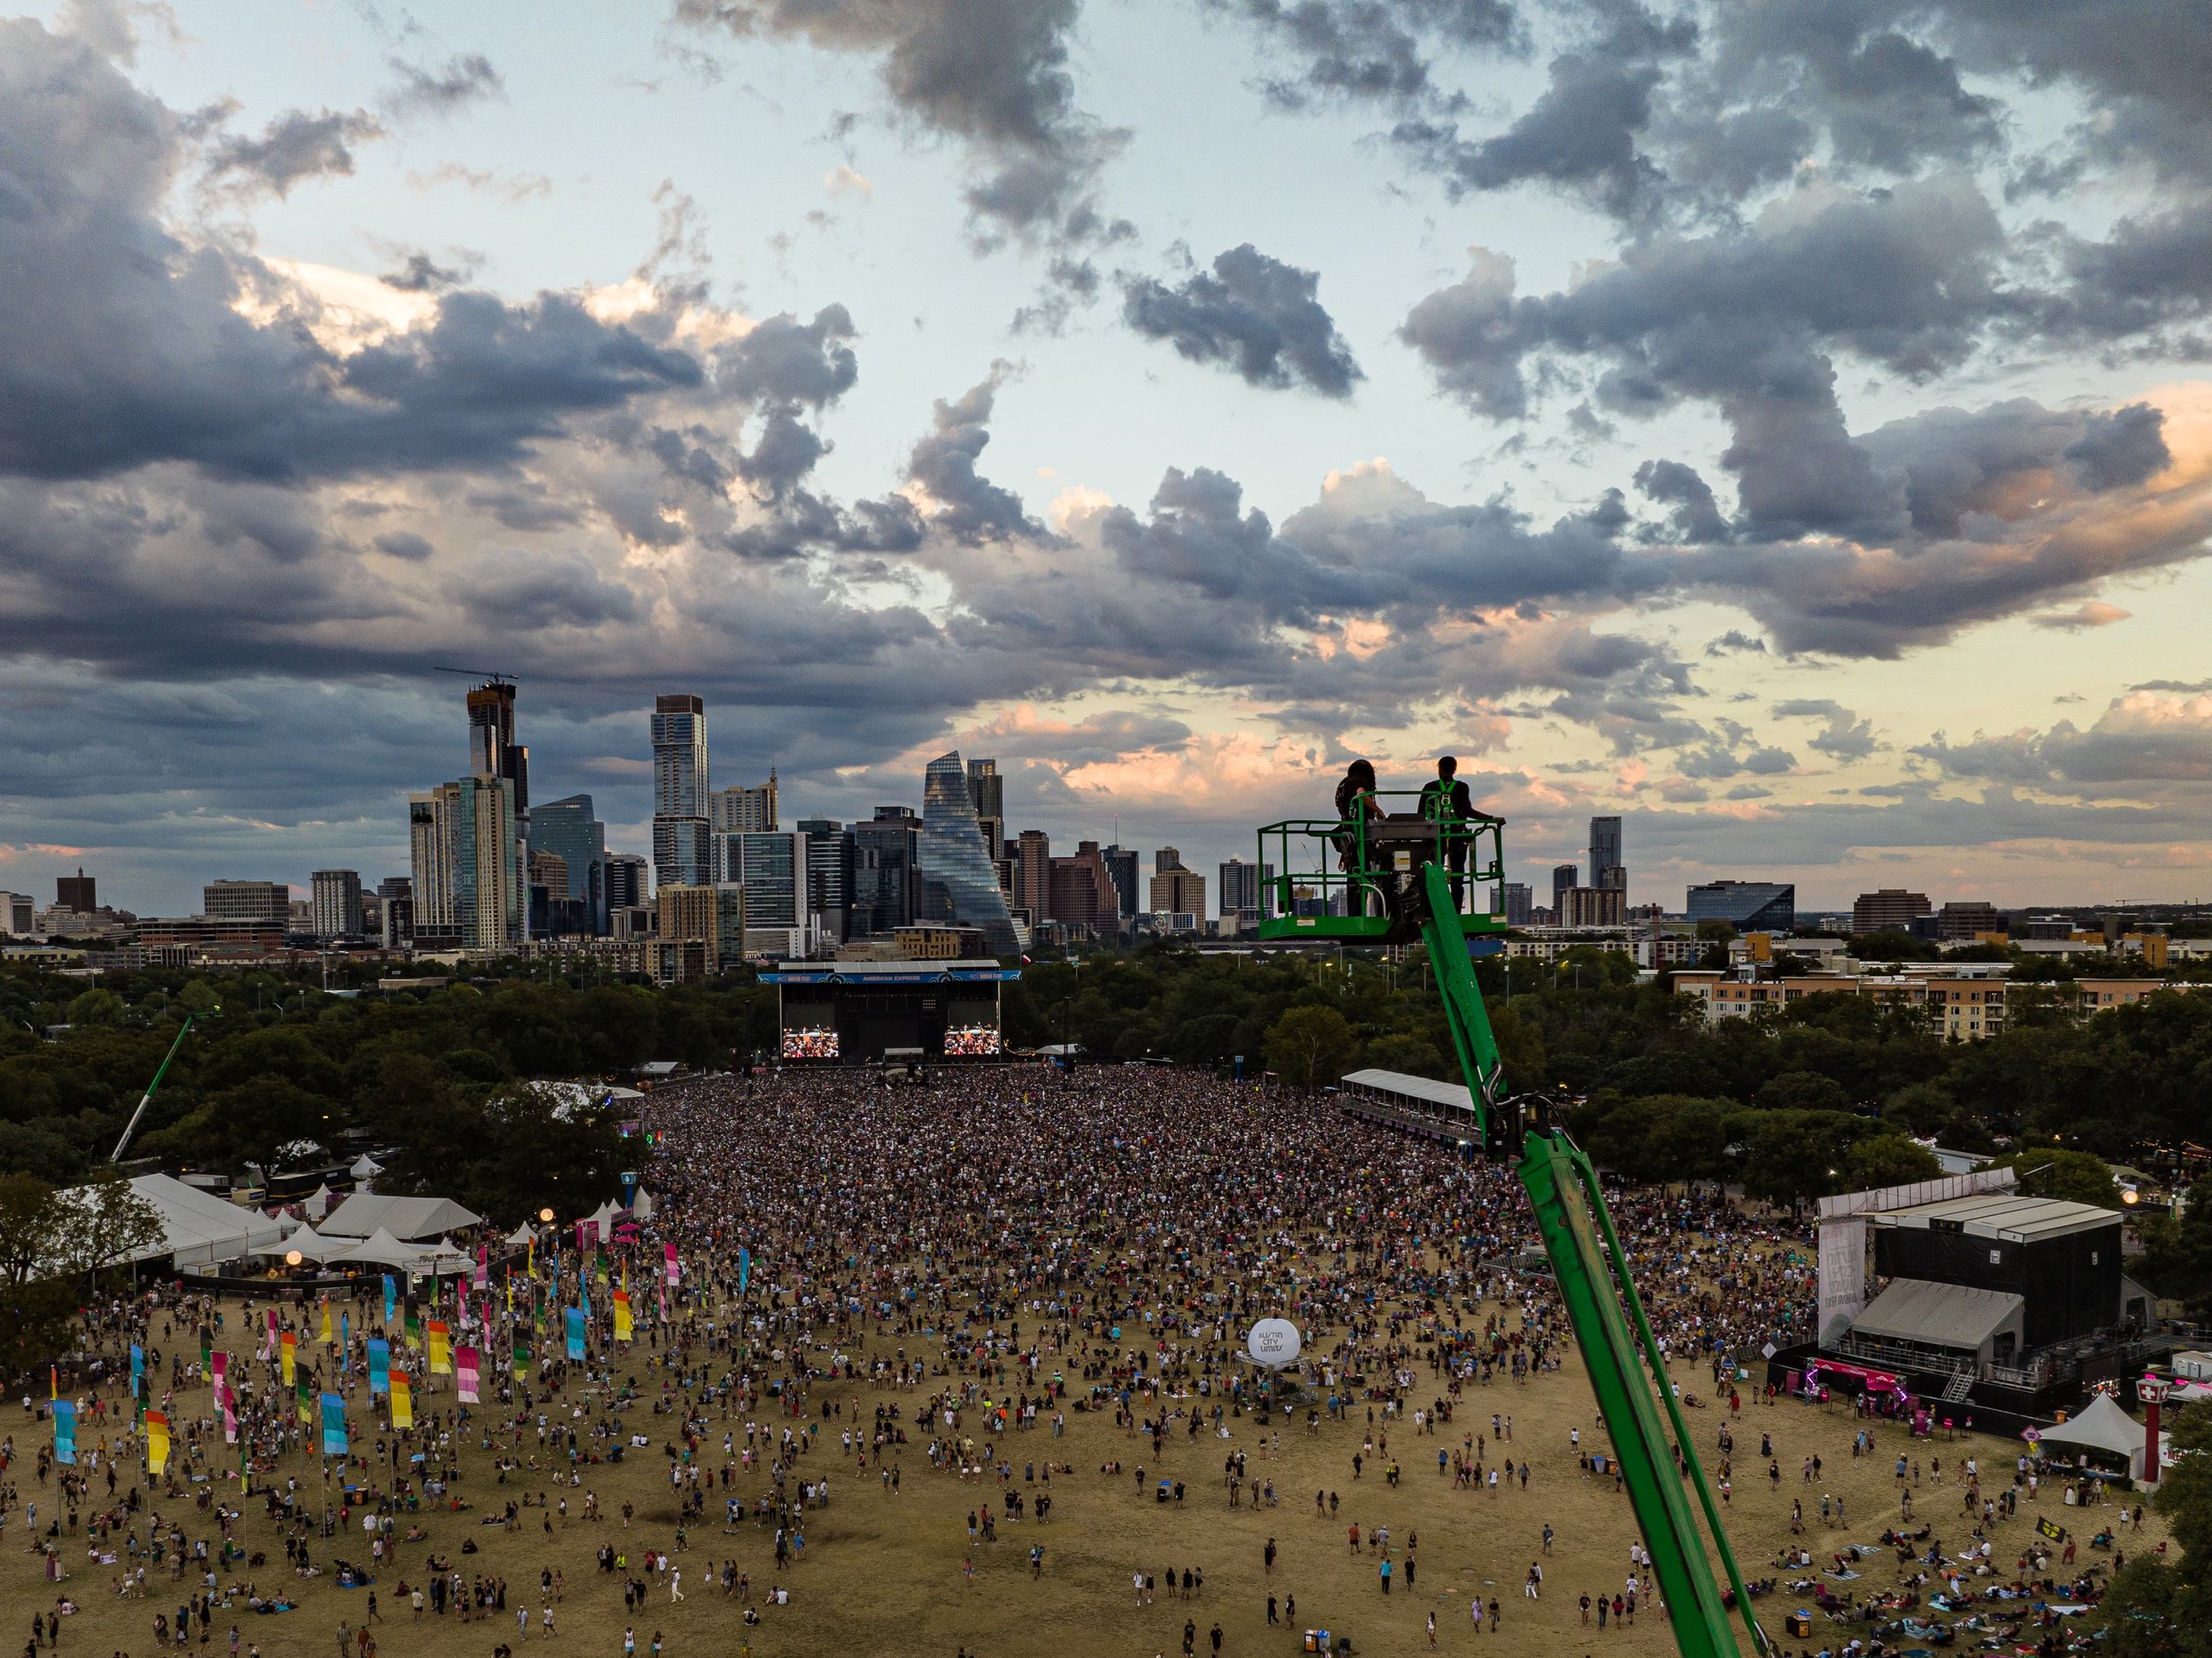 Keenan by Grant Hodgeon for ACL Fest 2022 WK2_DJI_0769.jpg